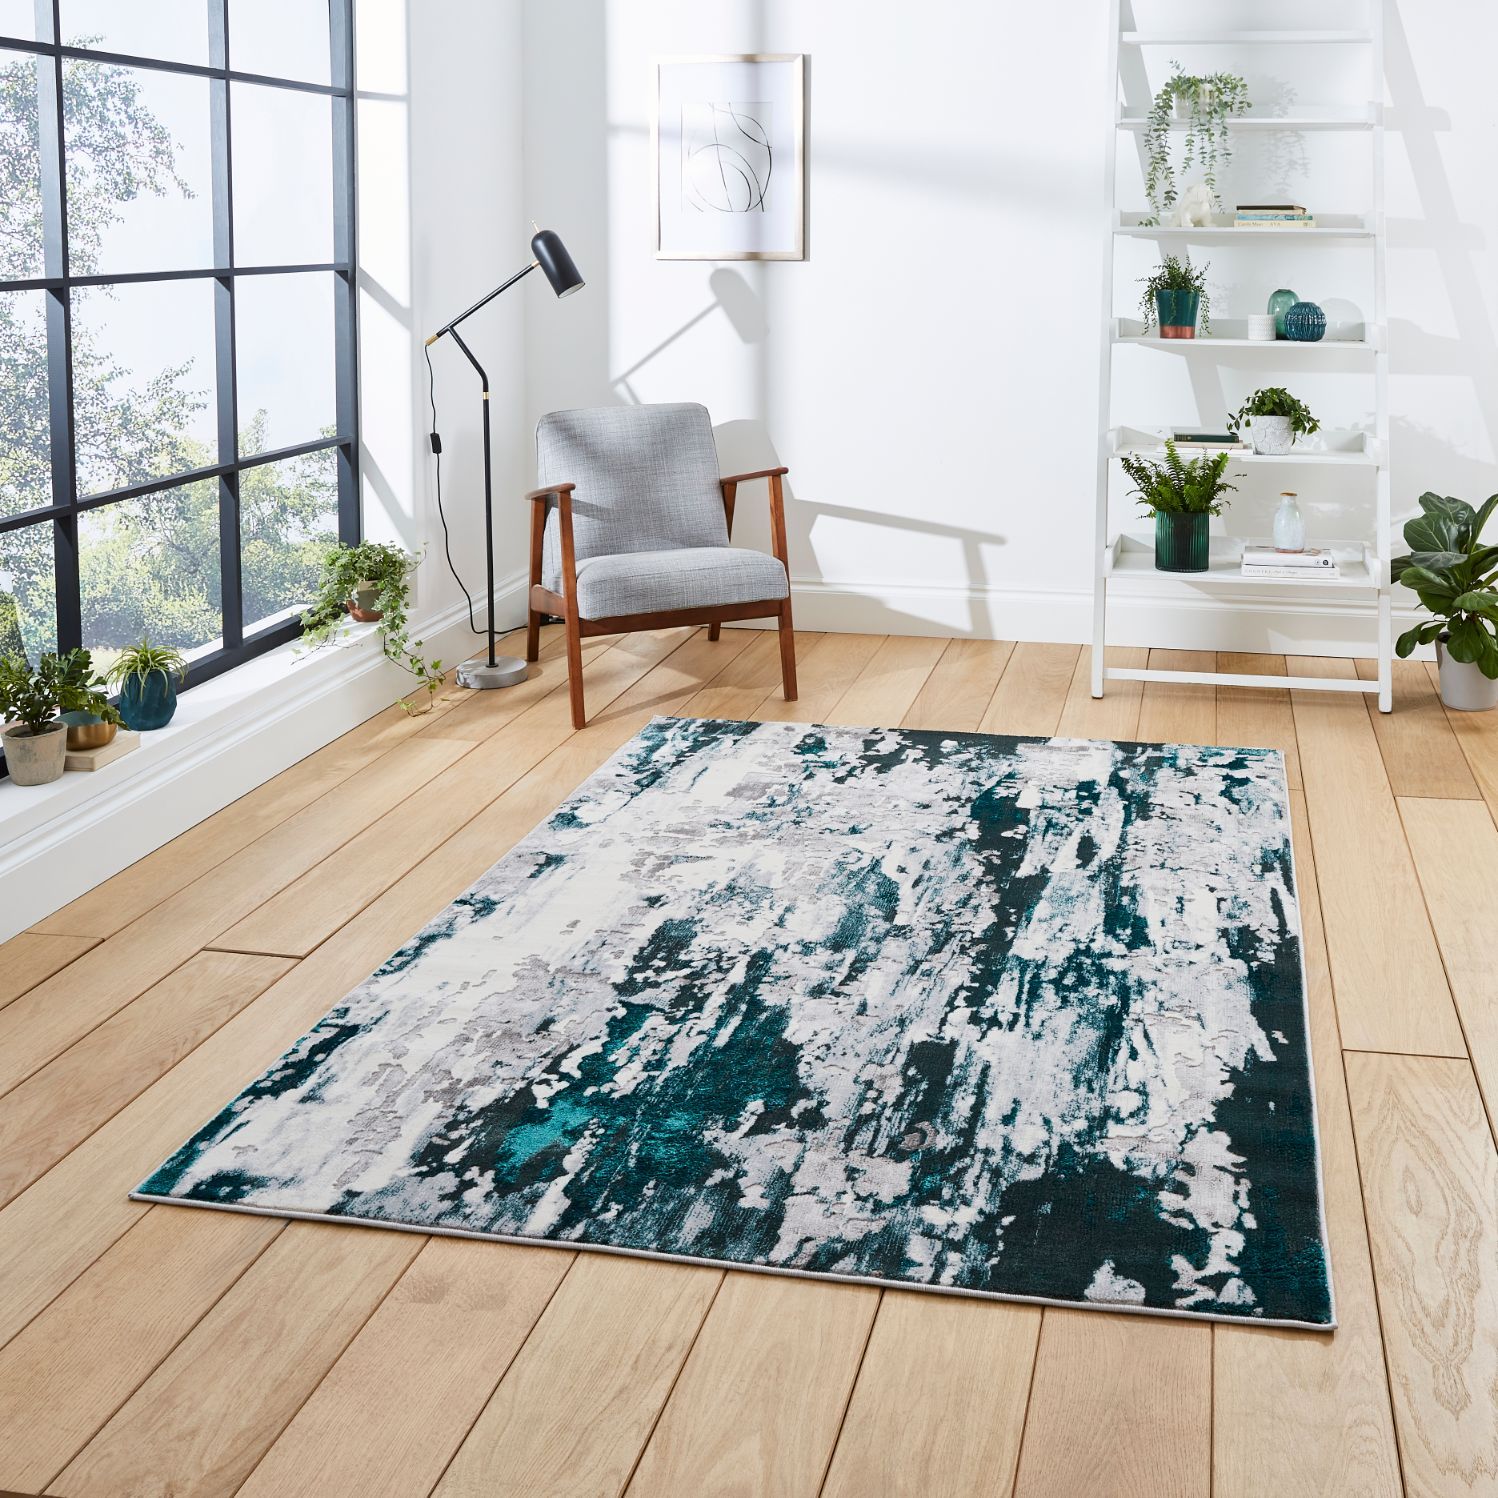 Apollo Think Gr580 Grey Green Rugs – Buy Gr580 Grey Green Rugs Online From  Rugs Direct Within Apollo Rugs (Photo 3 of 15)